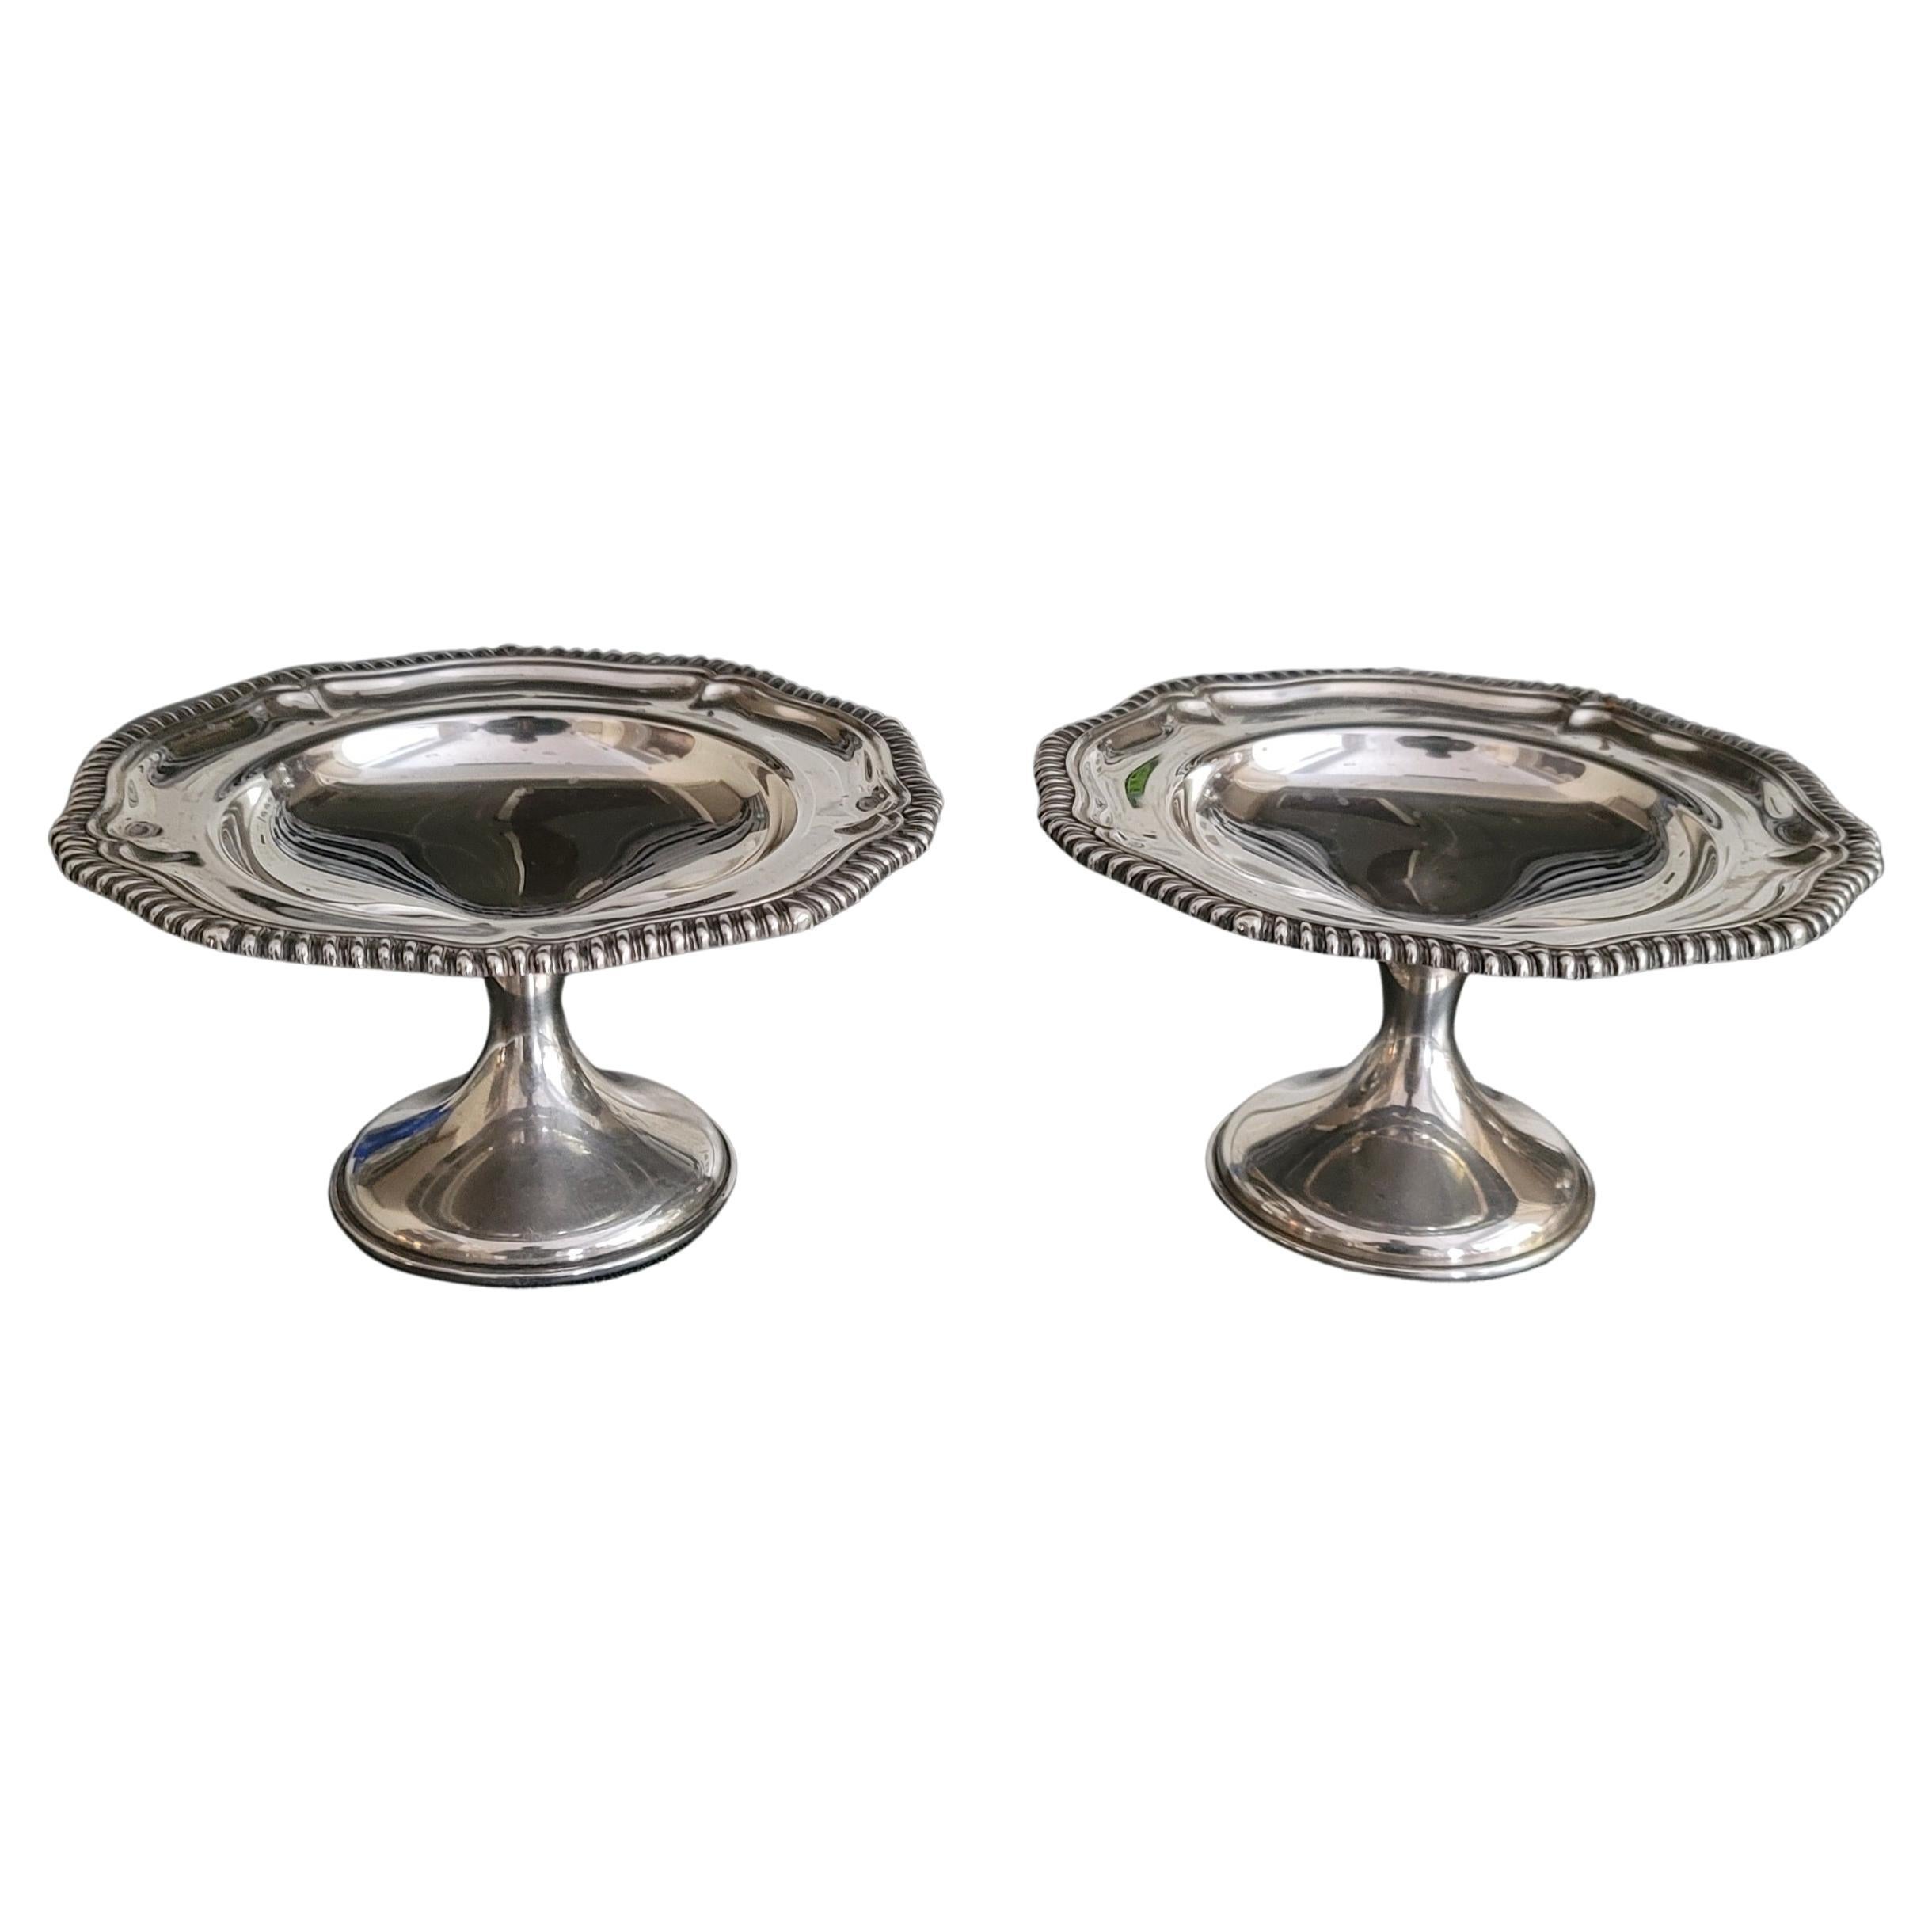 Pair of Gorham Weighted Sterling Silver Footed Compote Candy Nut Dishes In Good Condition For Sale In Germantown, MD